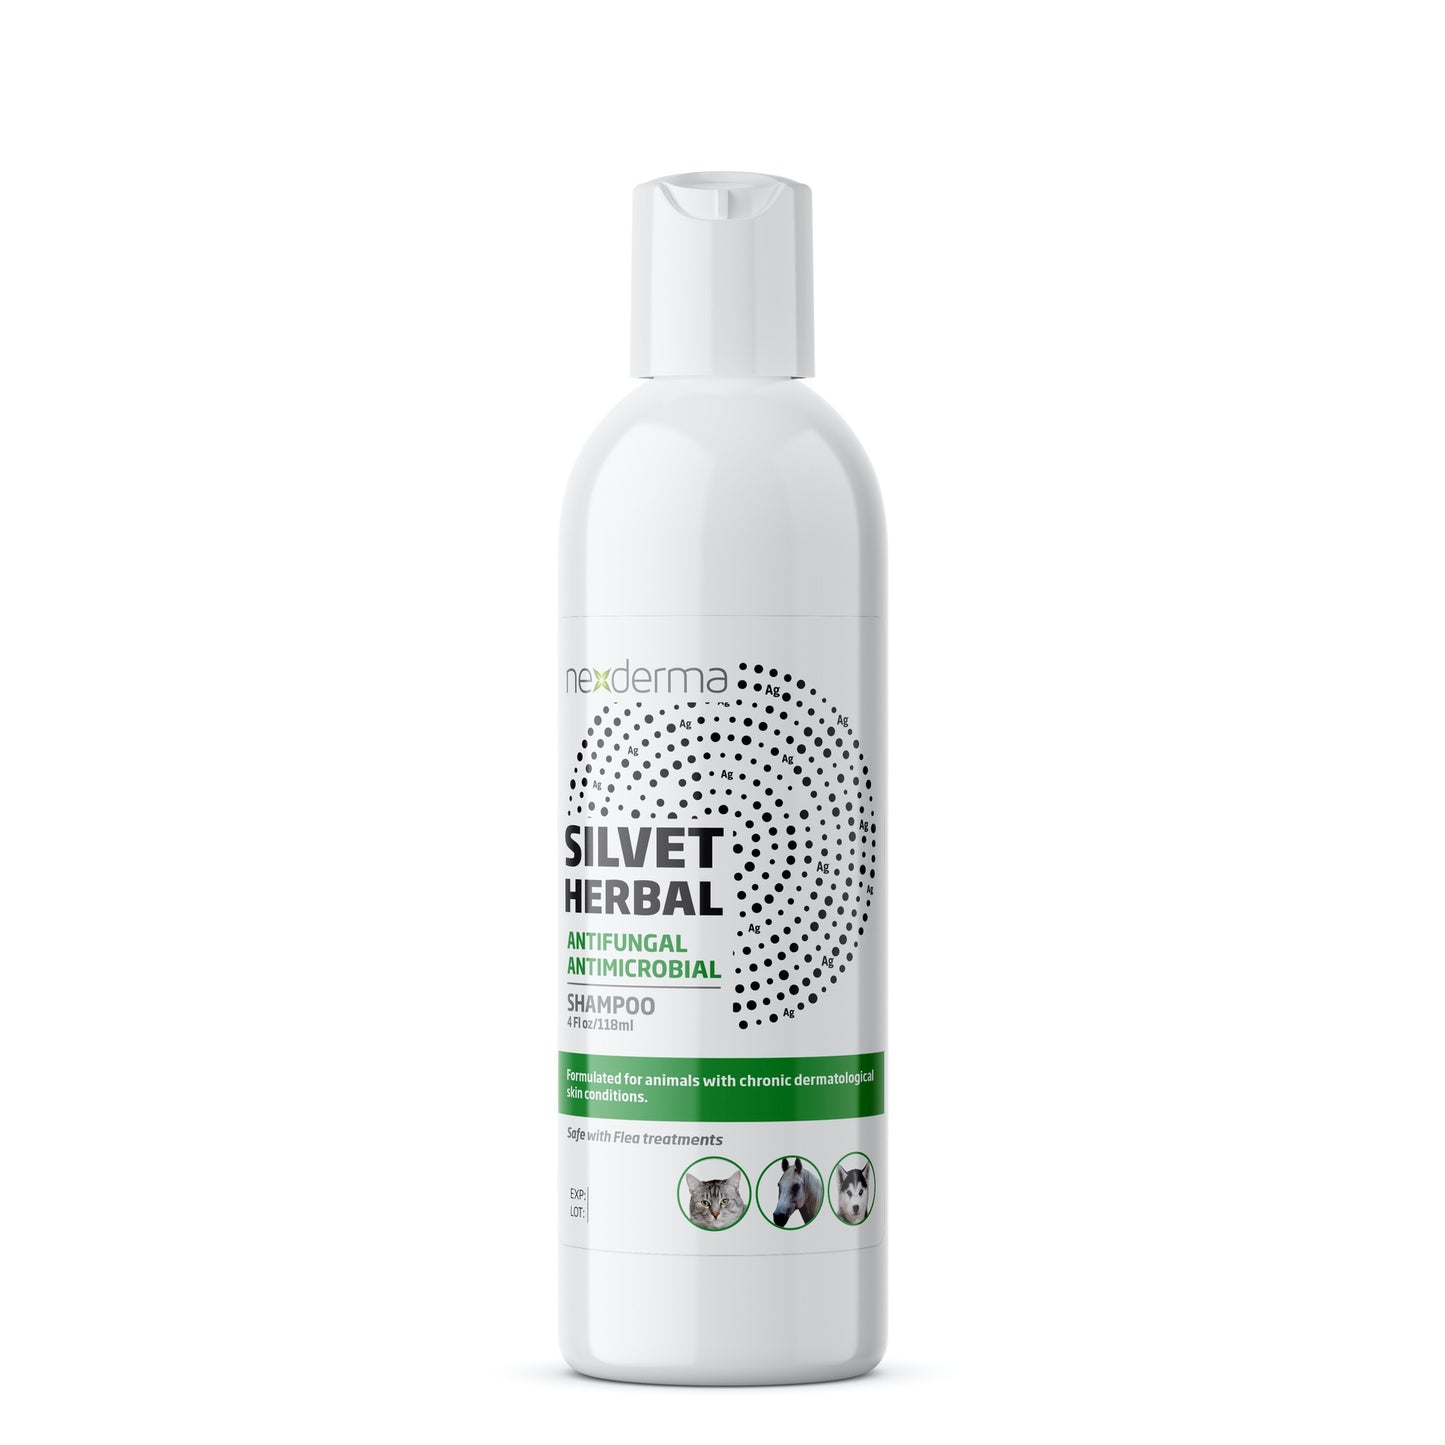 Silvet Antifungal Antimicrobial Shampoo Herbal Scent